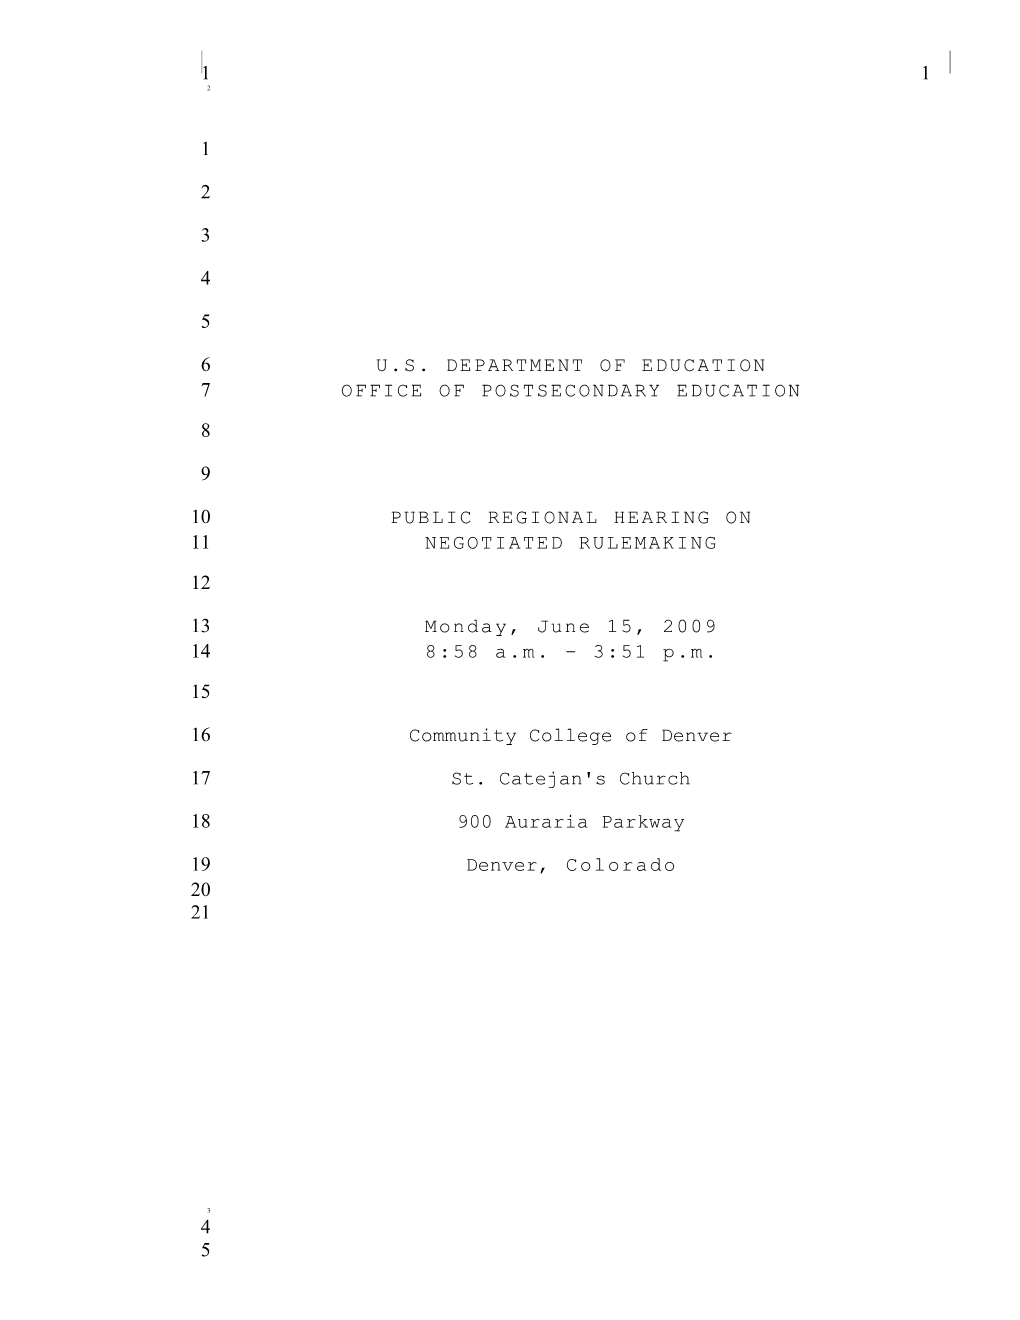 Negotiated Rulemaking for Higher Education - Transcript of the June 15, 2009 Public Hearing